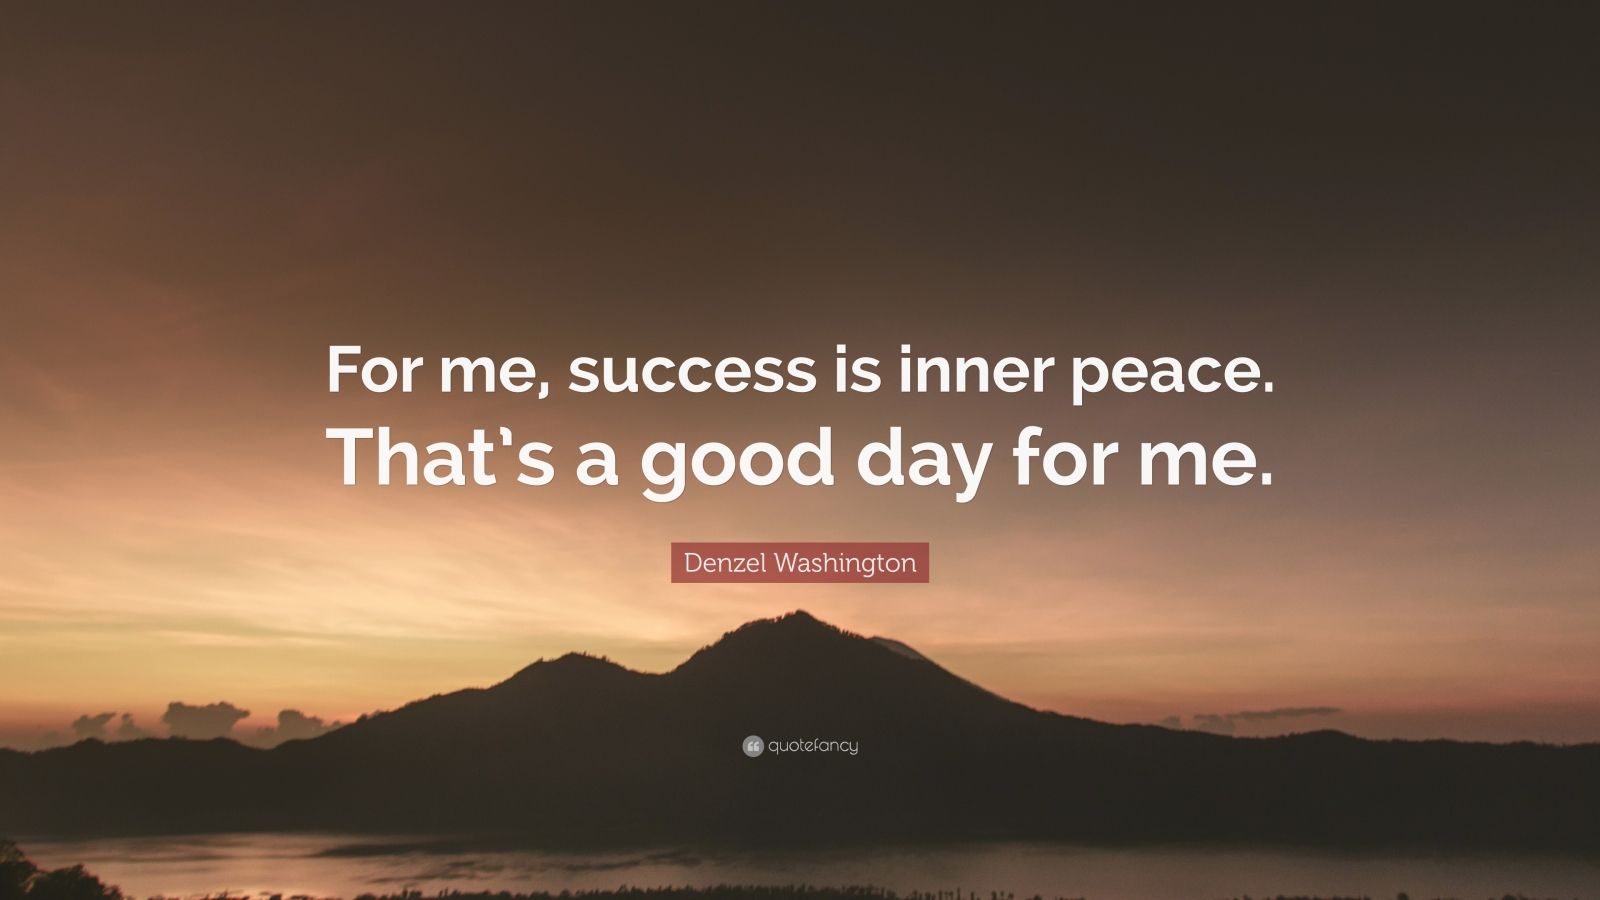 Denzel Washington Quote: “For me, success is inner peace. That's a